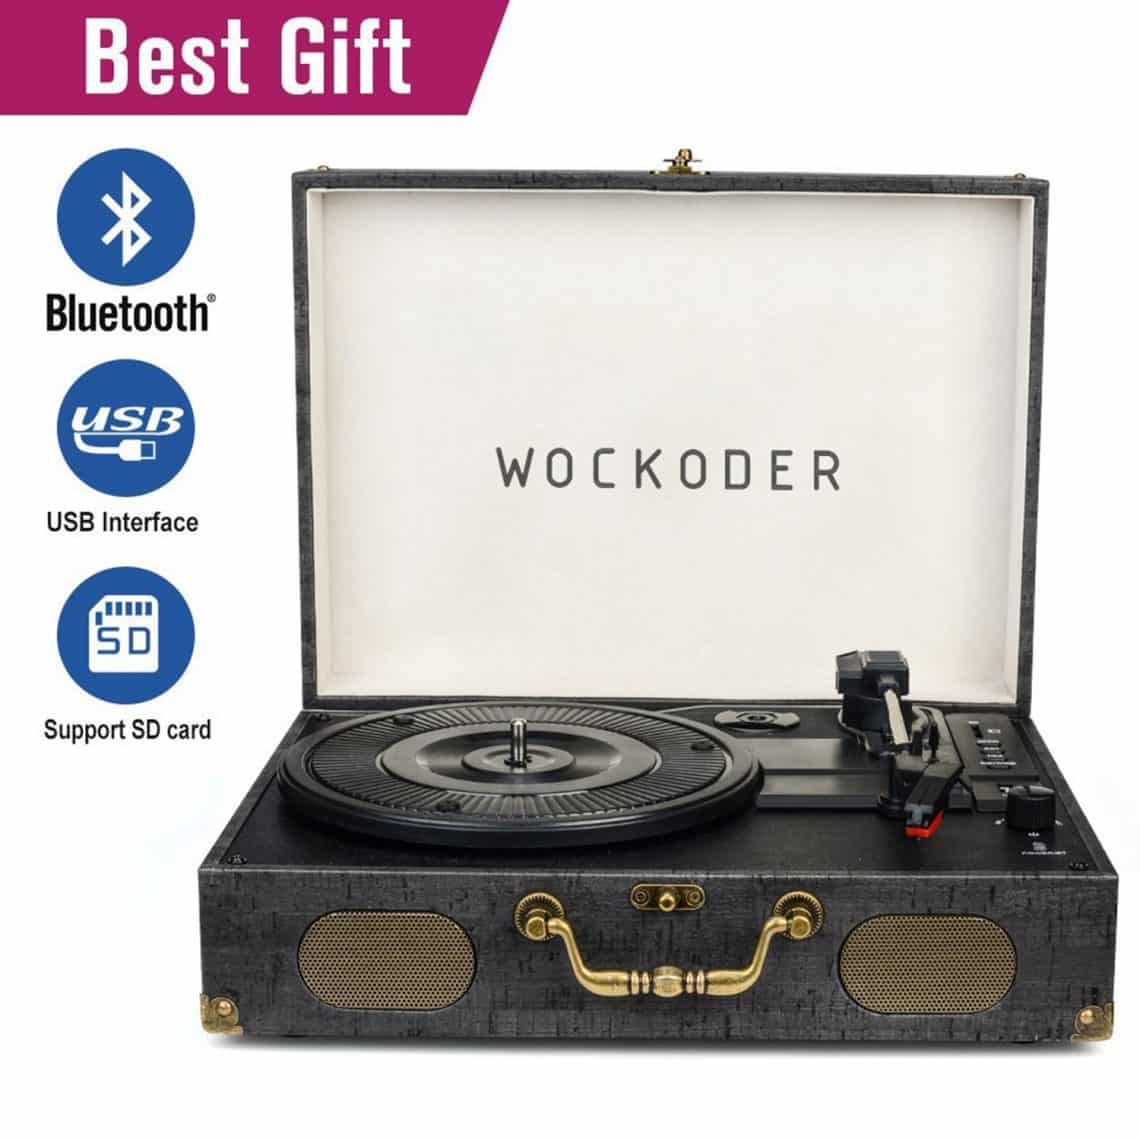 Top 10 Best Suitcase Vinyl Record Player in 2021 | Victrola Record Player